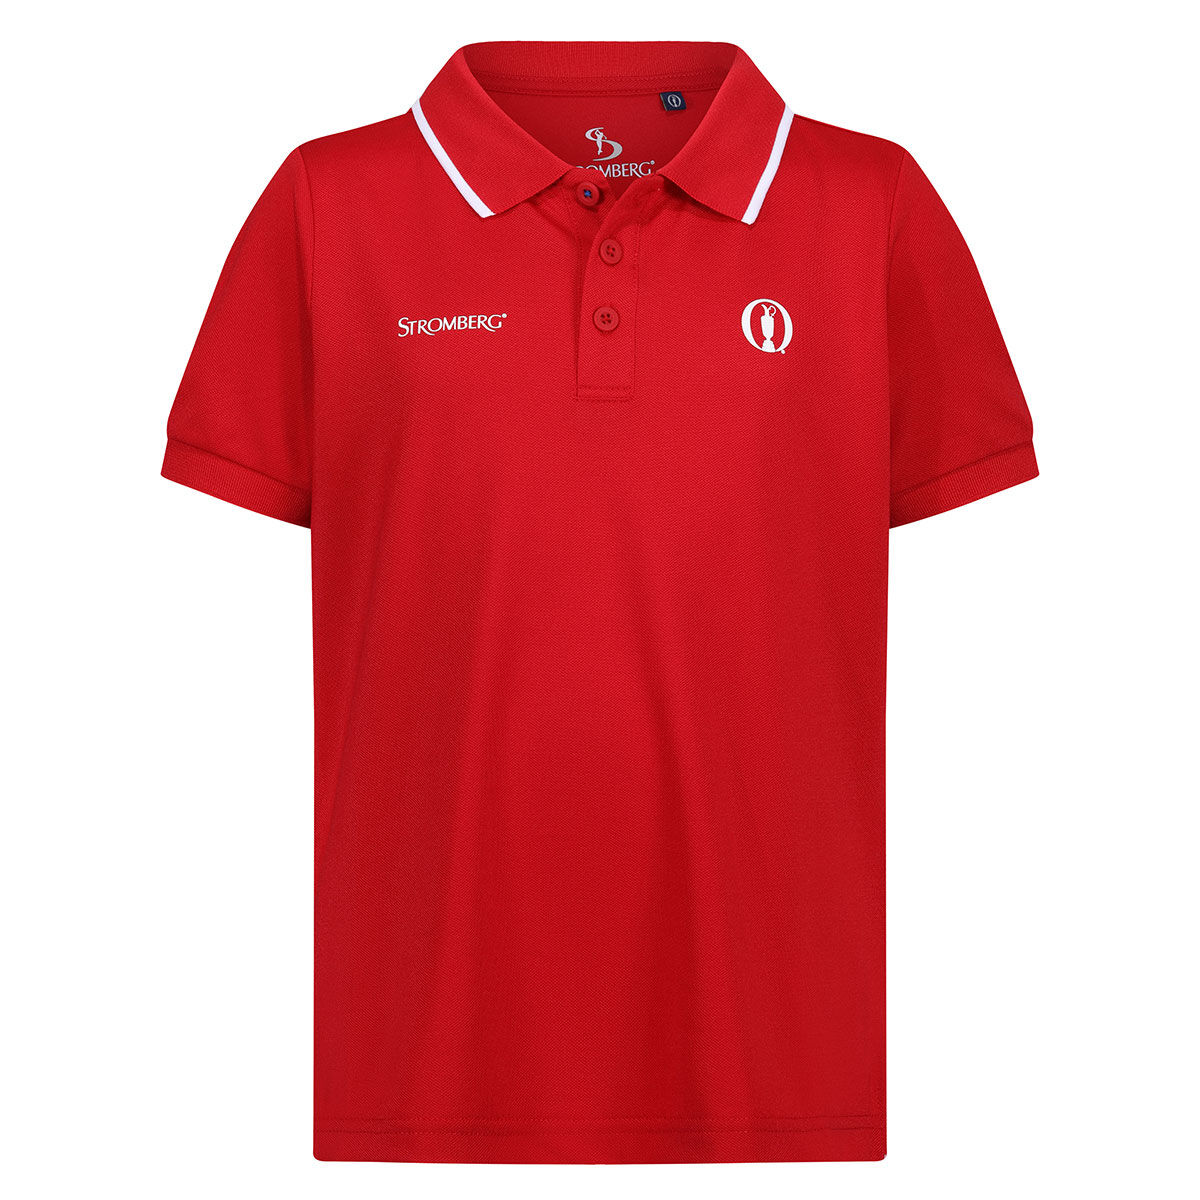 Stromberg Junior The Open Harbour Stretch Golf Polo Shirt, Unisex, Tango red, 8-9 years | American Golf